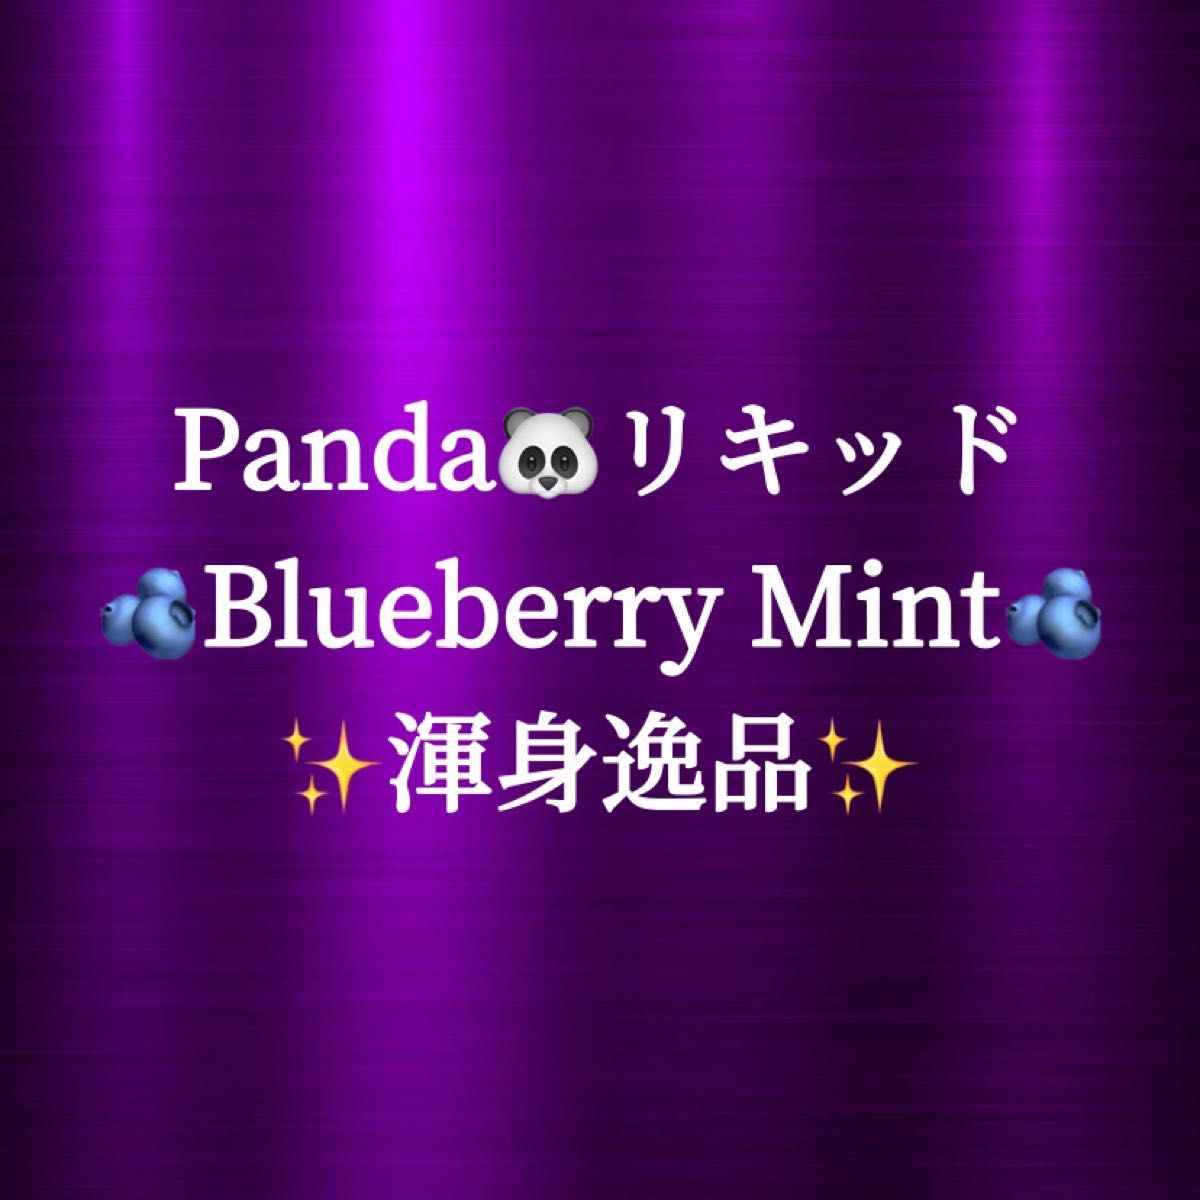 Blueberry Mint （1ml）【パンダリキッド公認代理店K'c】｜PayPayフリマ